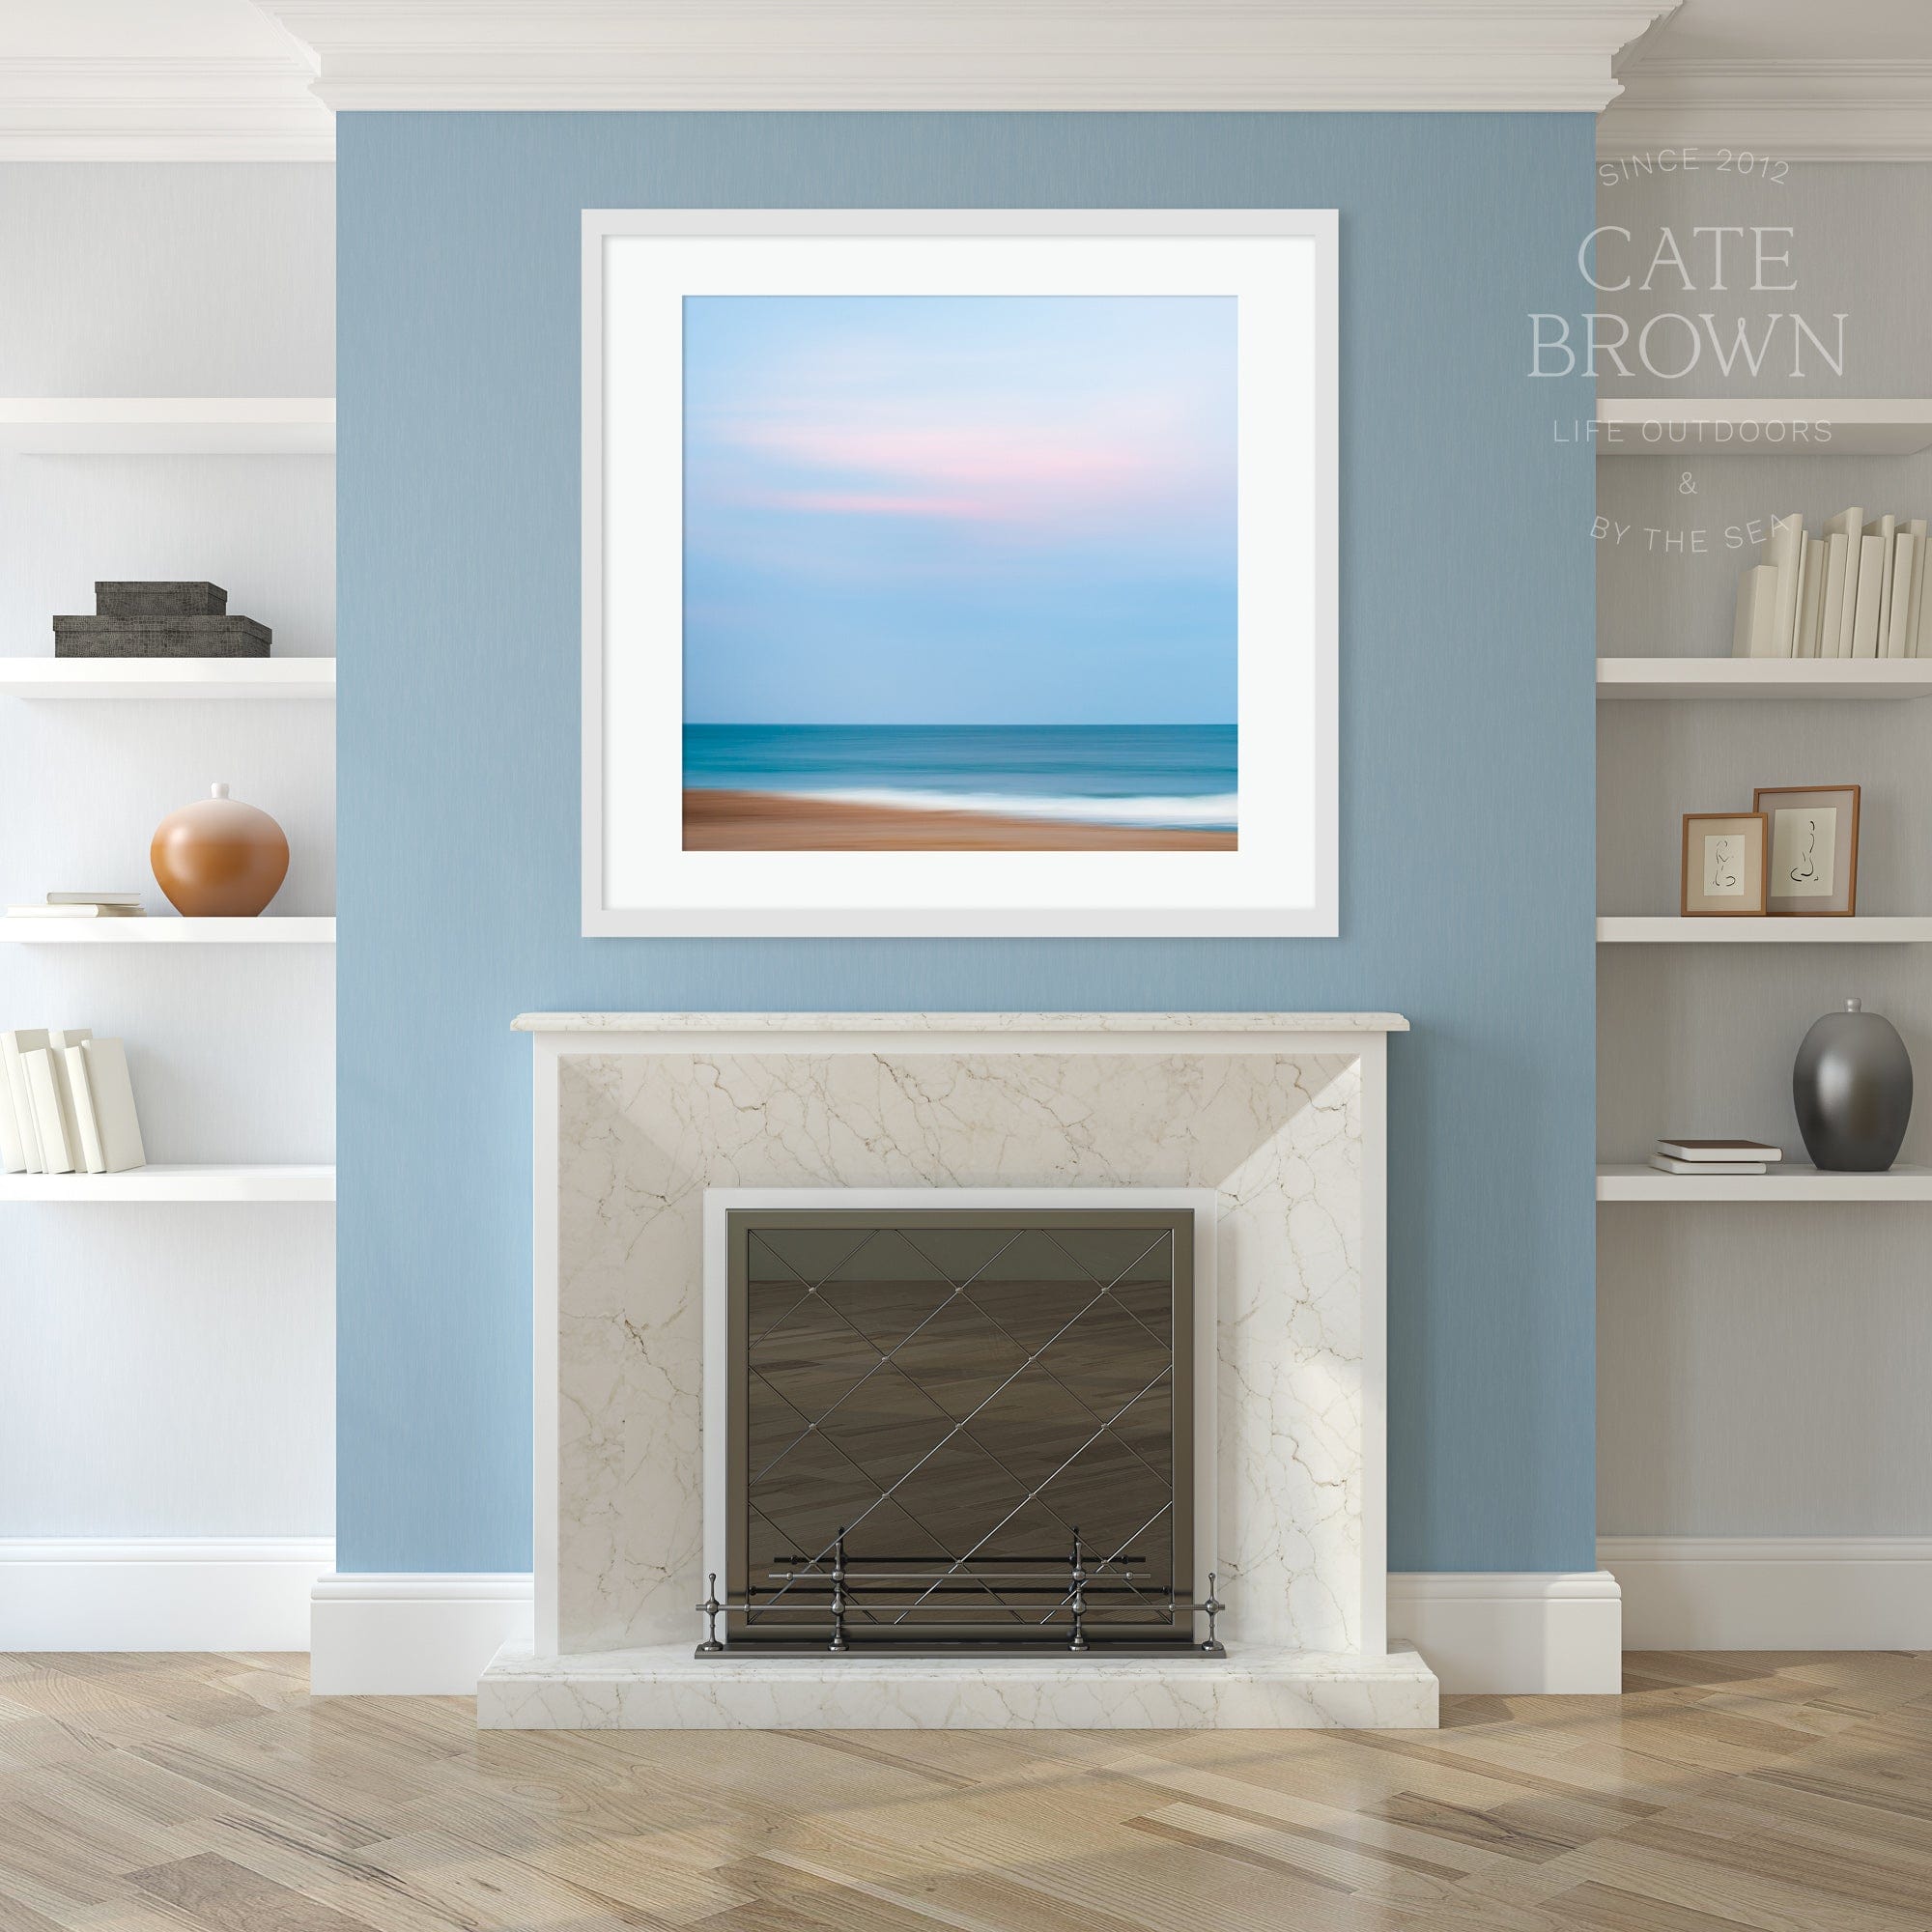 Cate Brown Photo Fine Art Print / 8"x8" / None (Print Only) Qeba #4  //  Abstract Photography Made to Order Ocean Fine Art